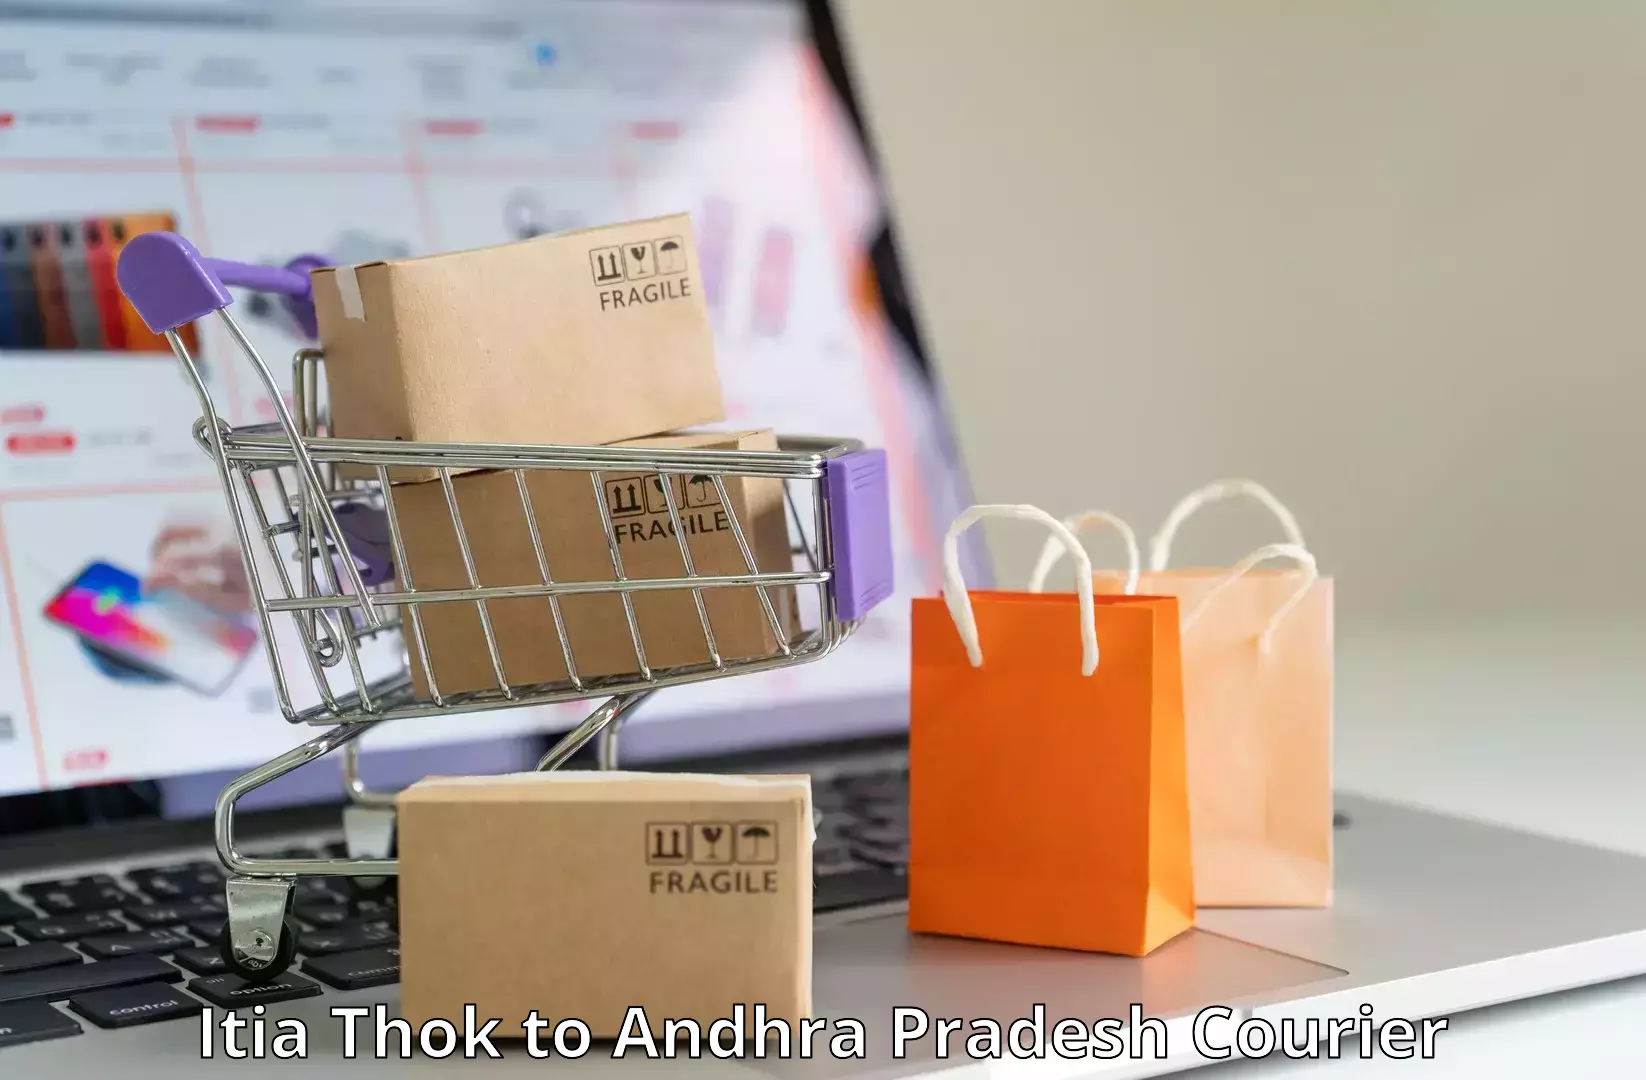 Efficient parcel tracking Itia Thok to Narpala